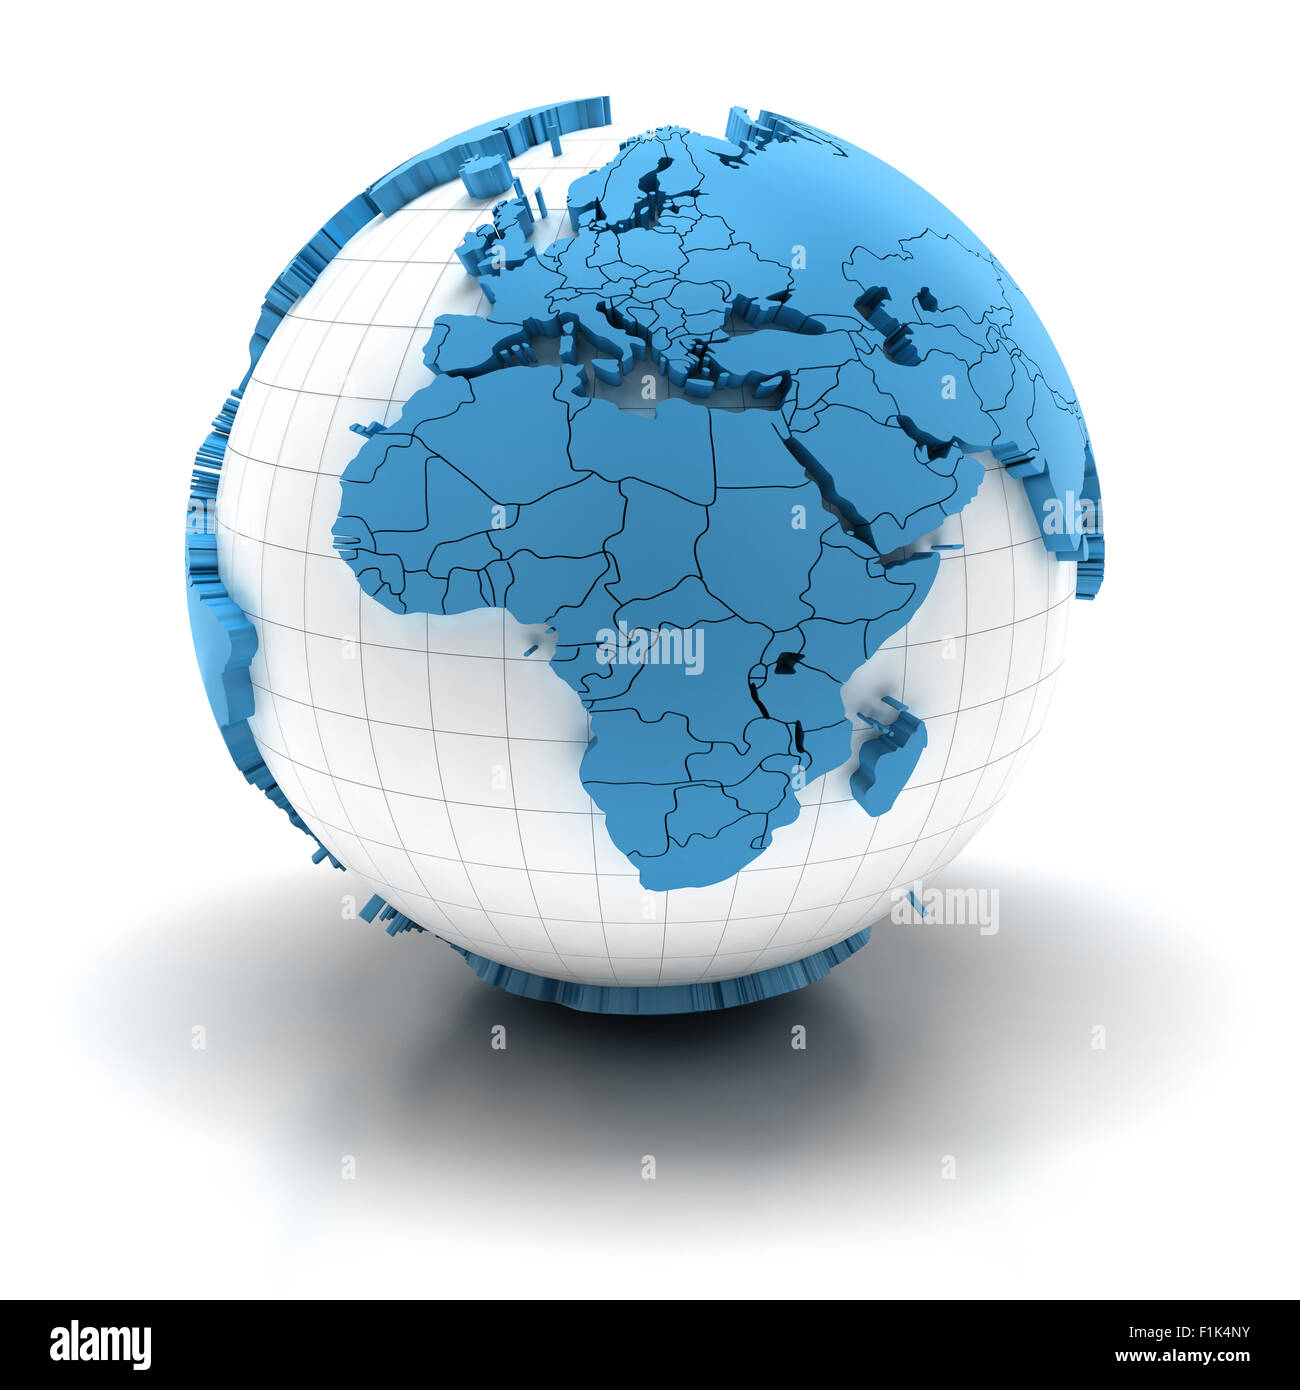 Globe with extruded continents, Europe and Africa region Stock Photo